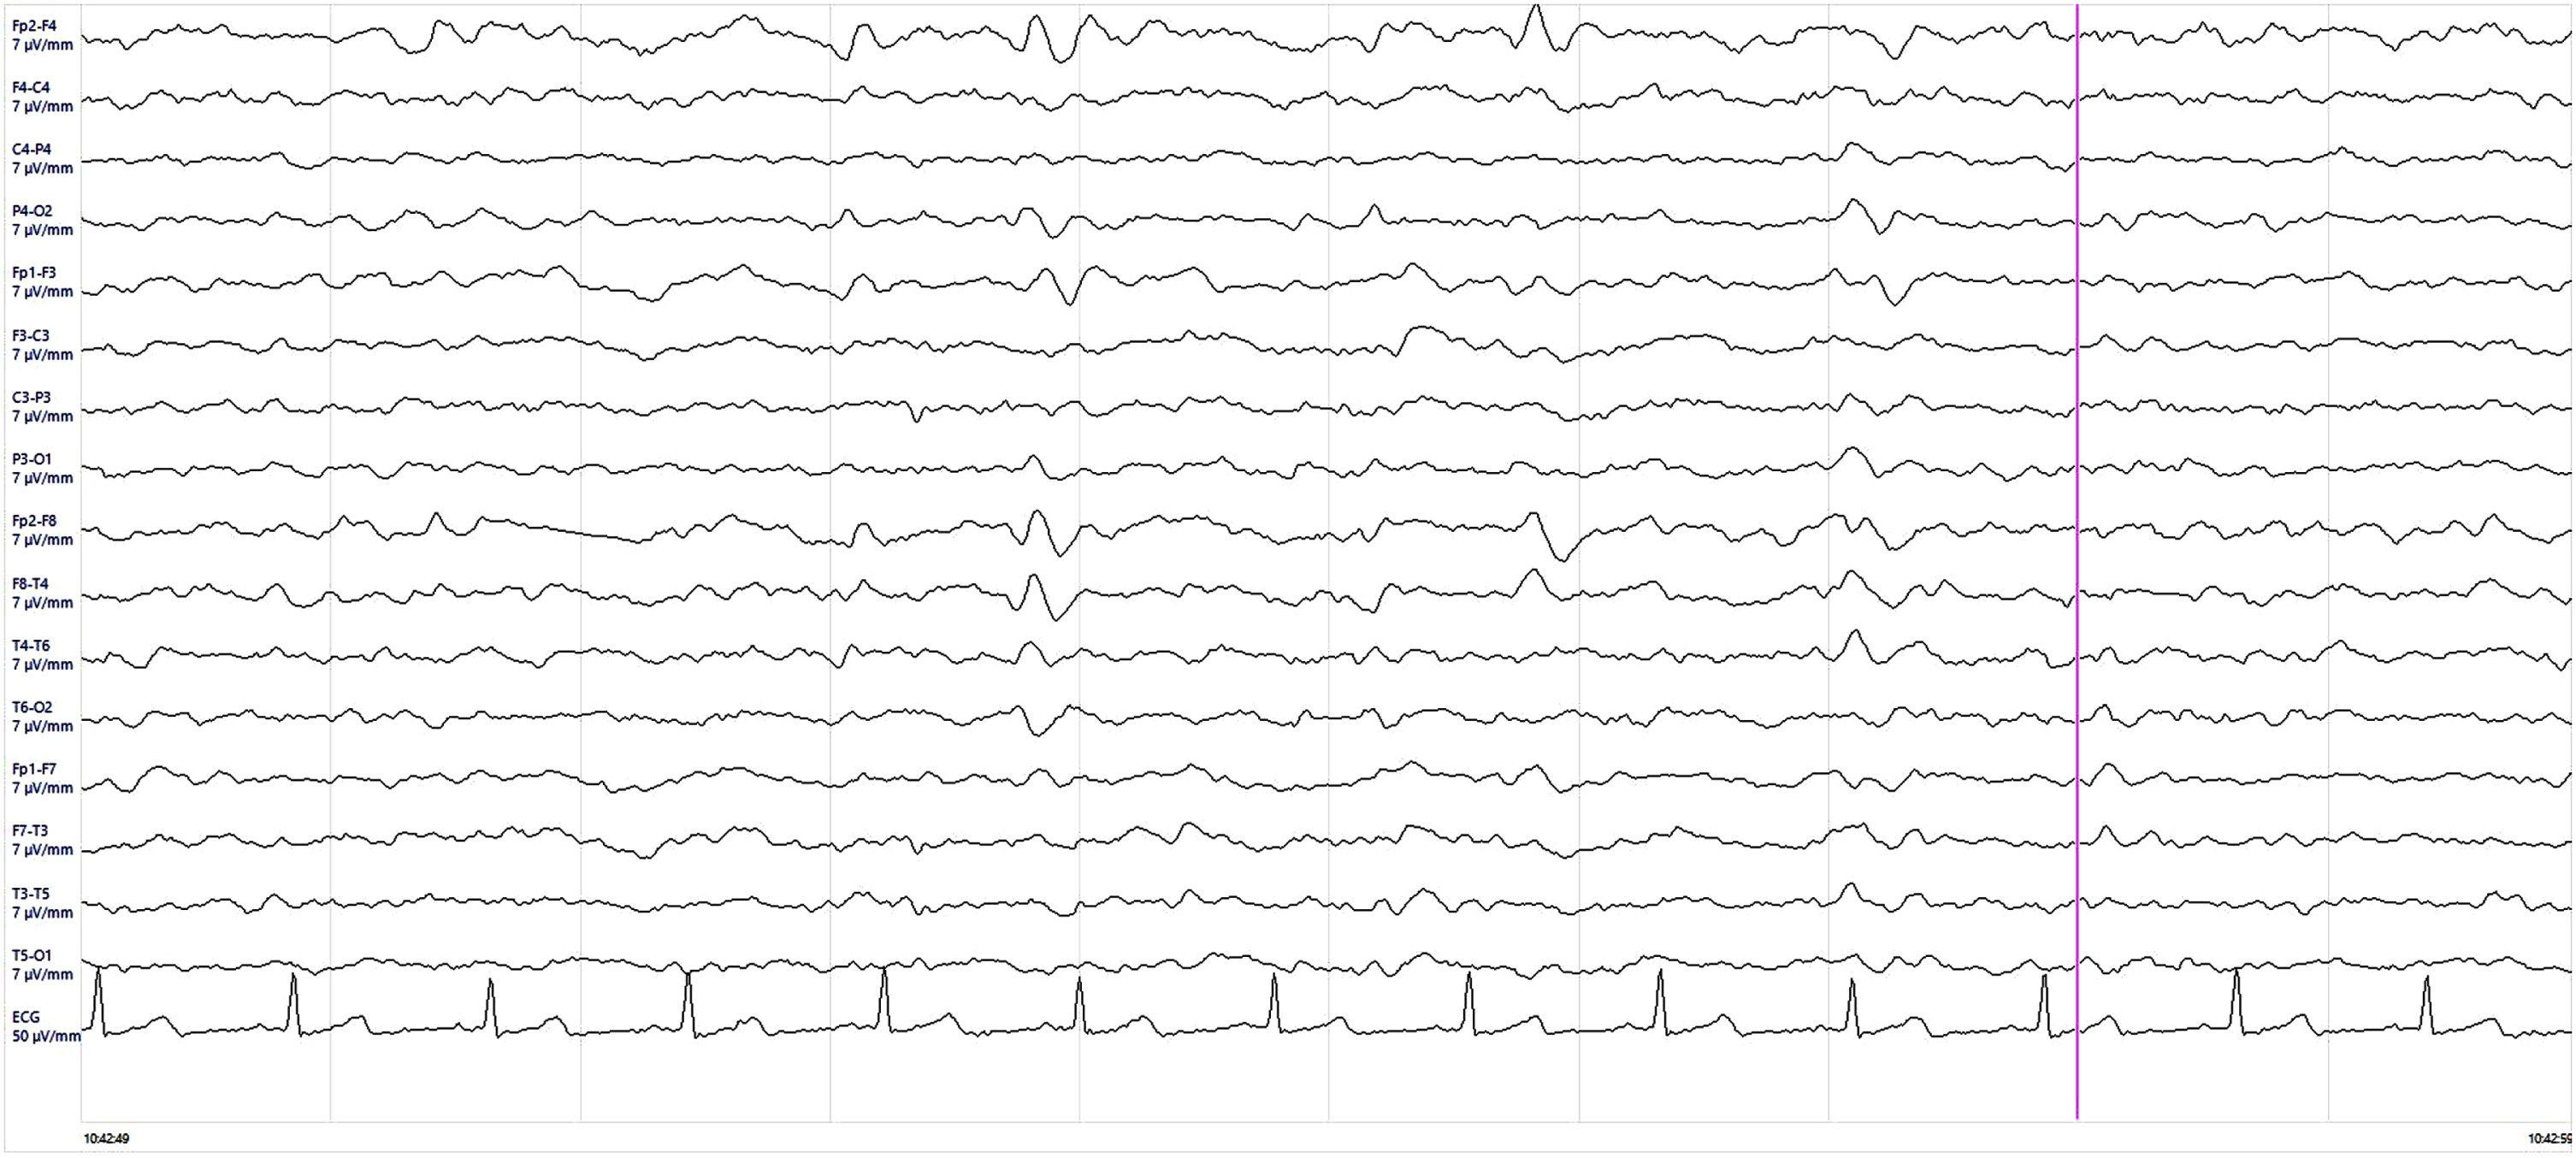 Electroencephalogram (EEG) findings. EEG showed rare quasi-periodic right frontotemporal sharp wave complexes.